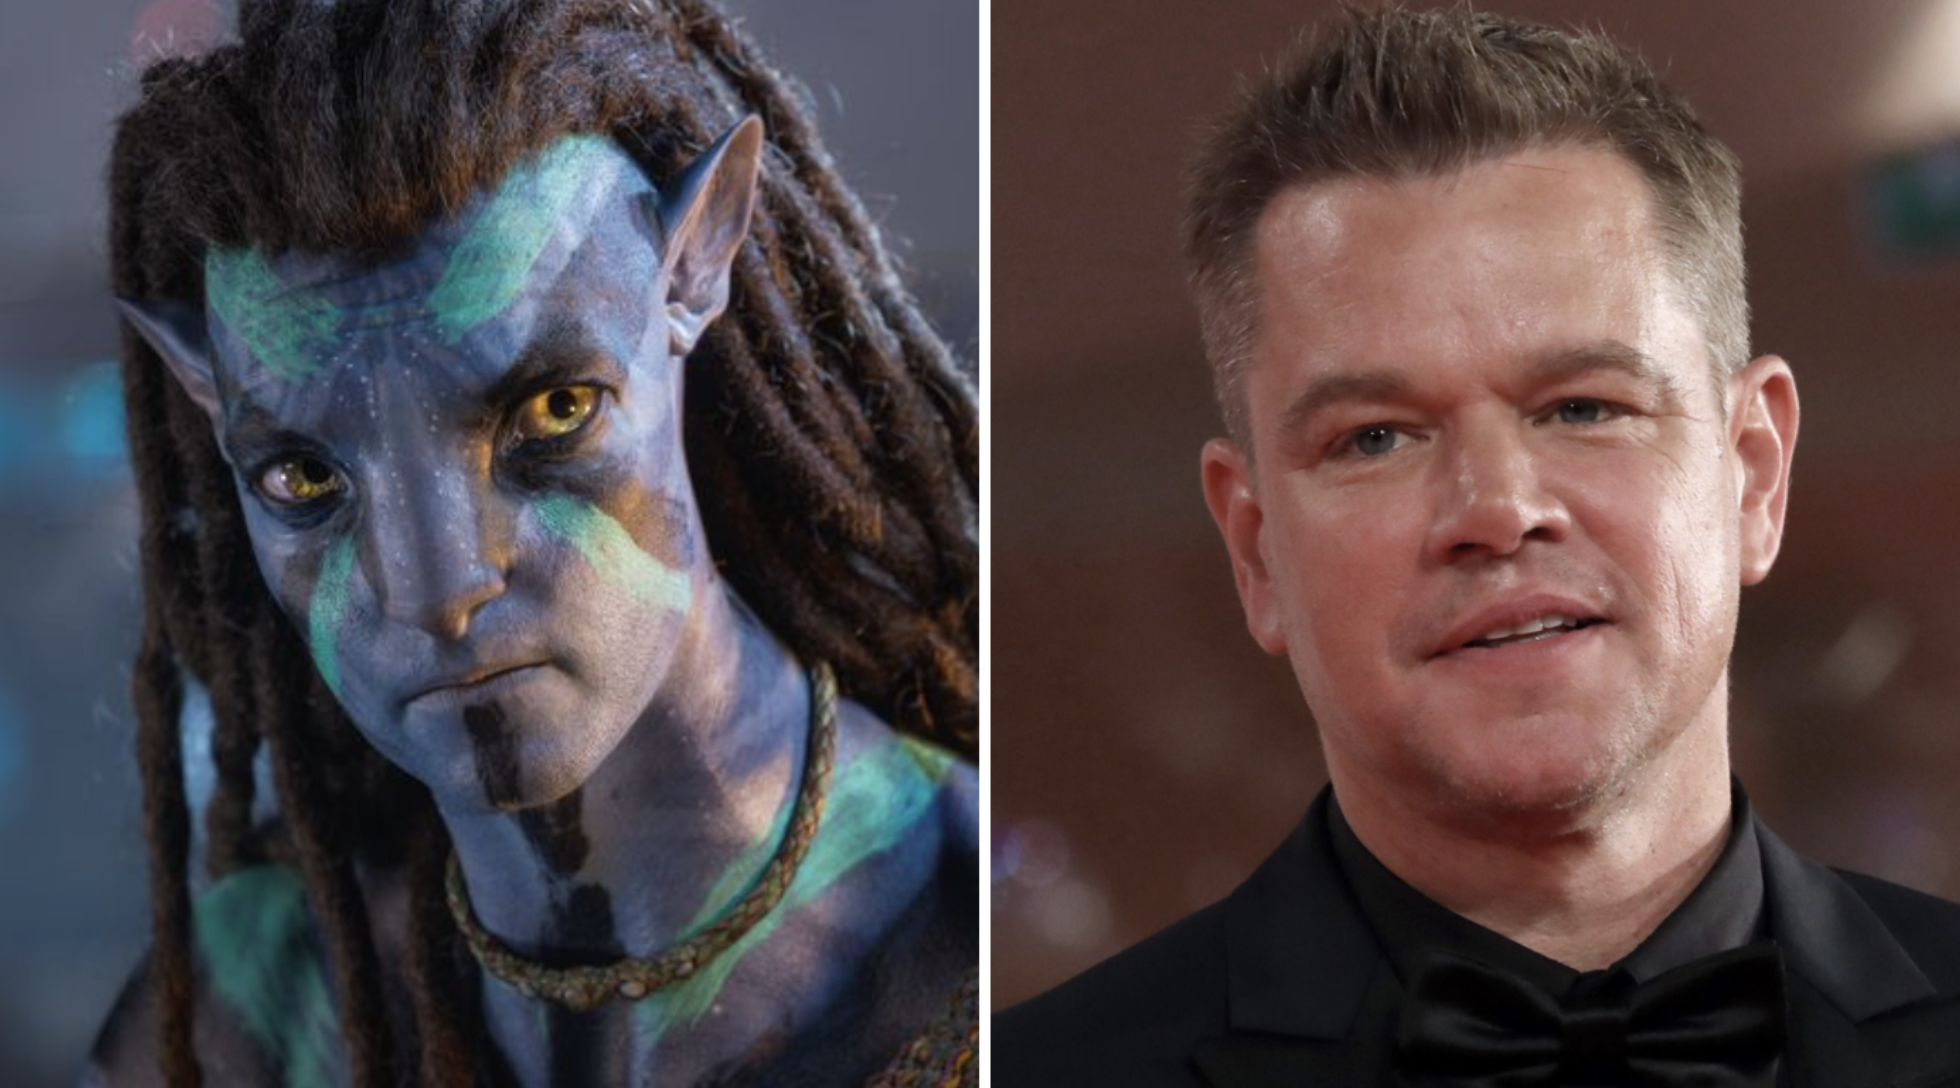 “TIL that James Cameron offered Matt Damon 10% of ‘Avatar,’ which would've earned the actor over $250 million.”